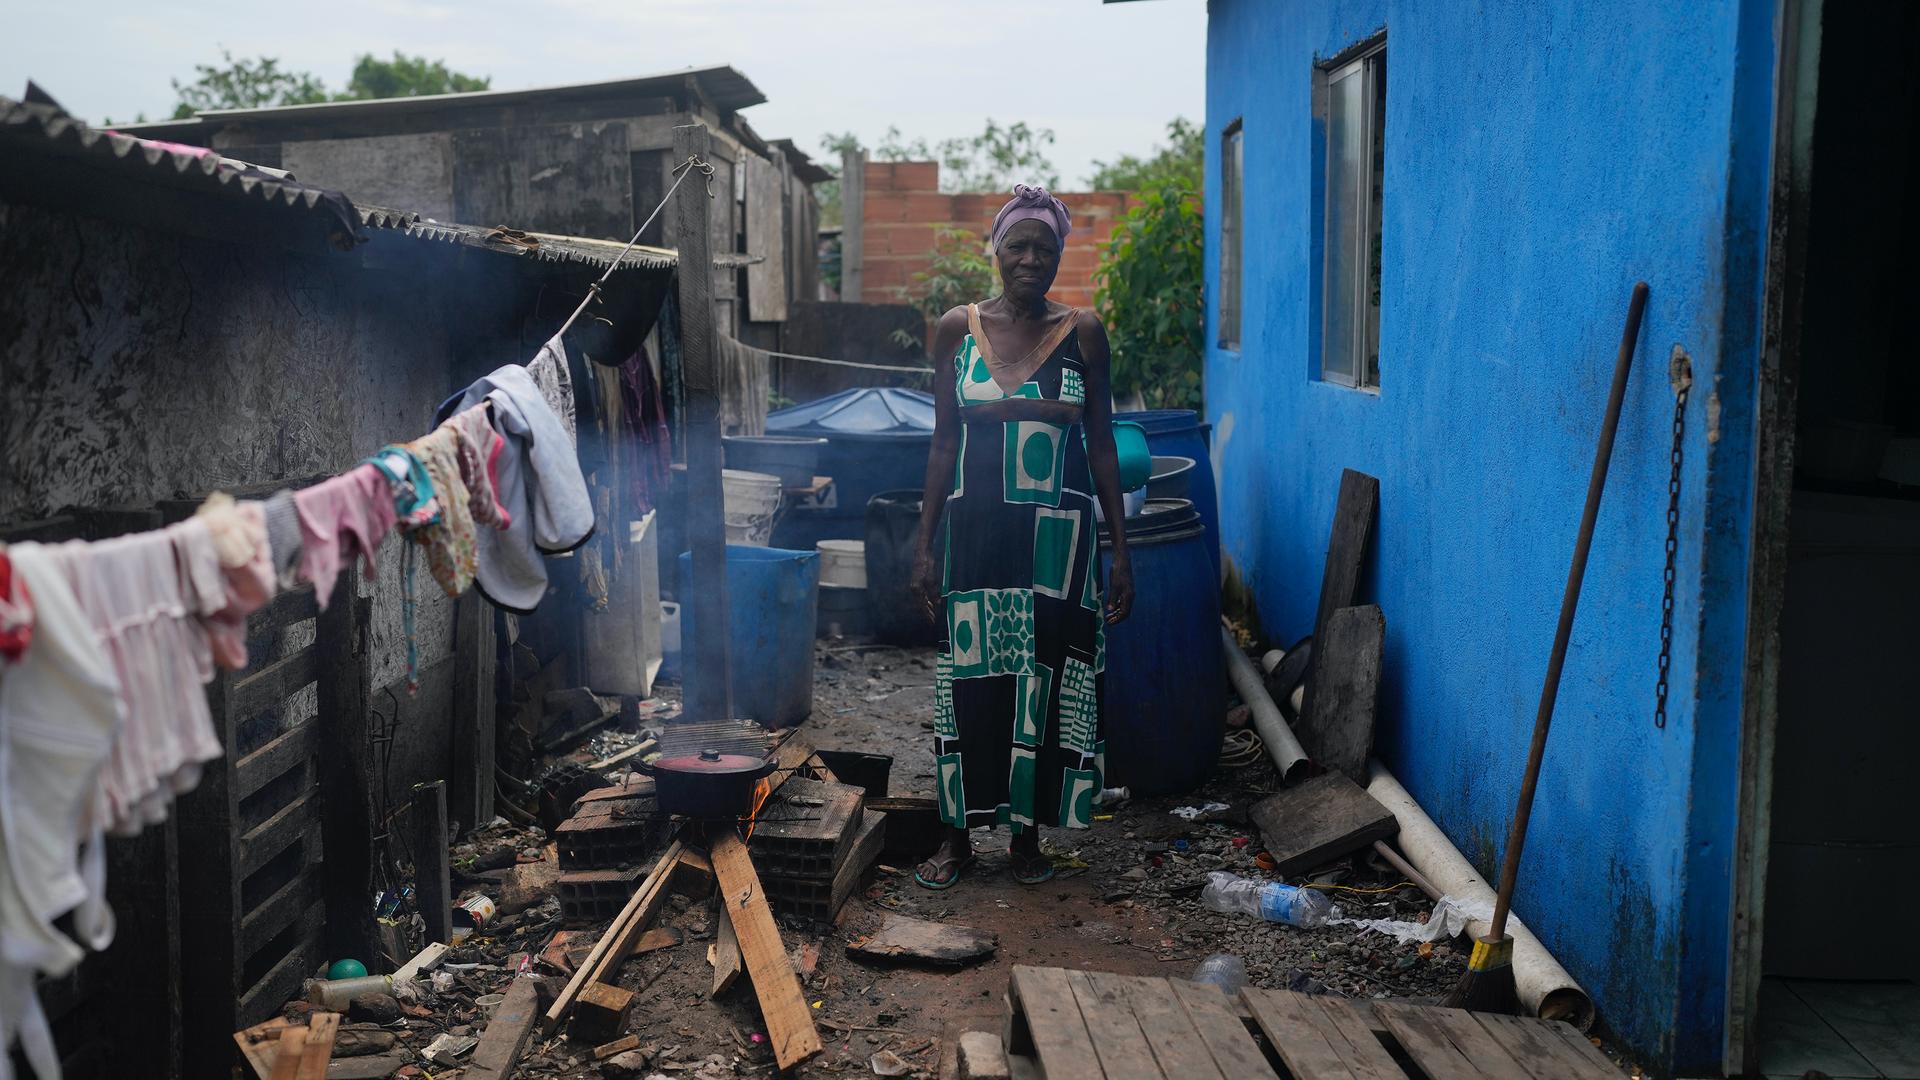 Lady Laurentino, 74, poses for a photo next to a wood fire she uses to cook near the door of her home in the Jardim Gramacho favela of Rio de Janeiro, Brazil, Oct. 4, 2021. With the surge in cooking gas prices, Laurentino says she is cooking with wood bec